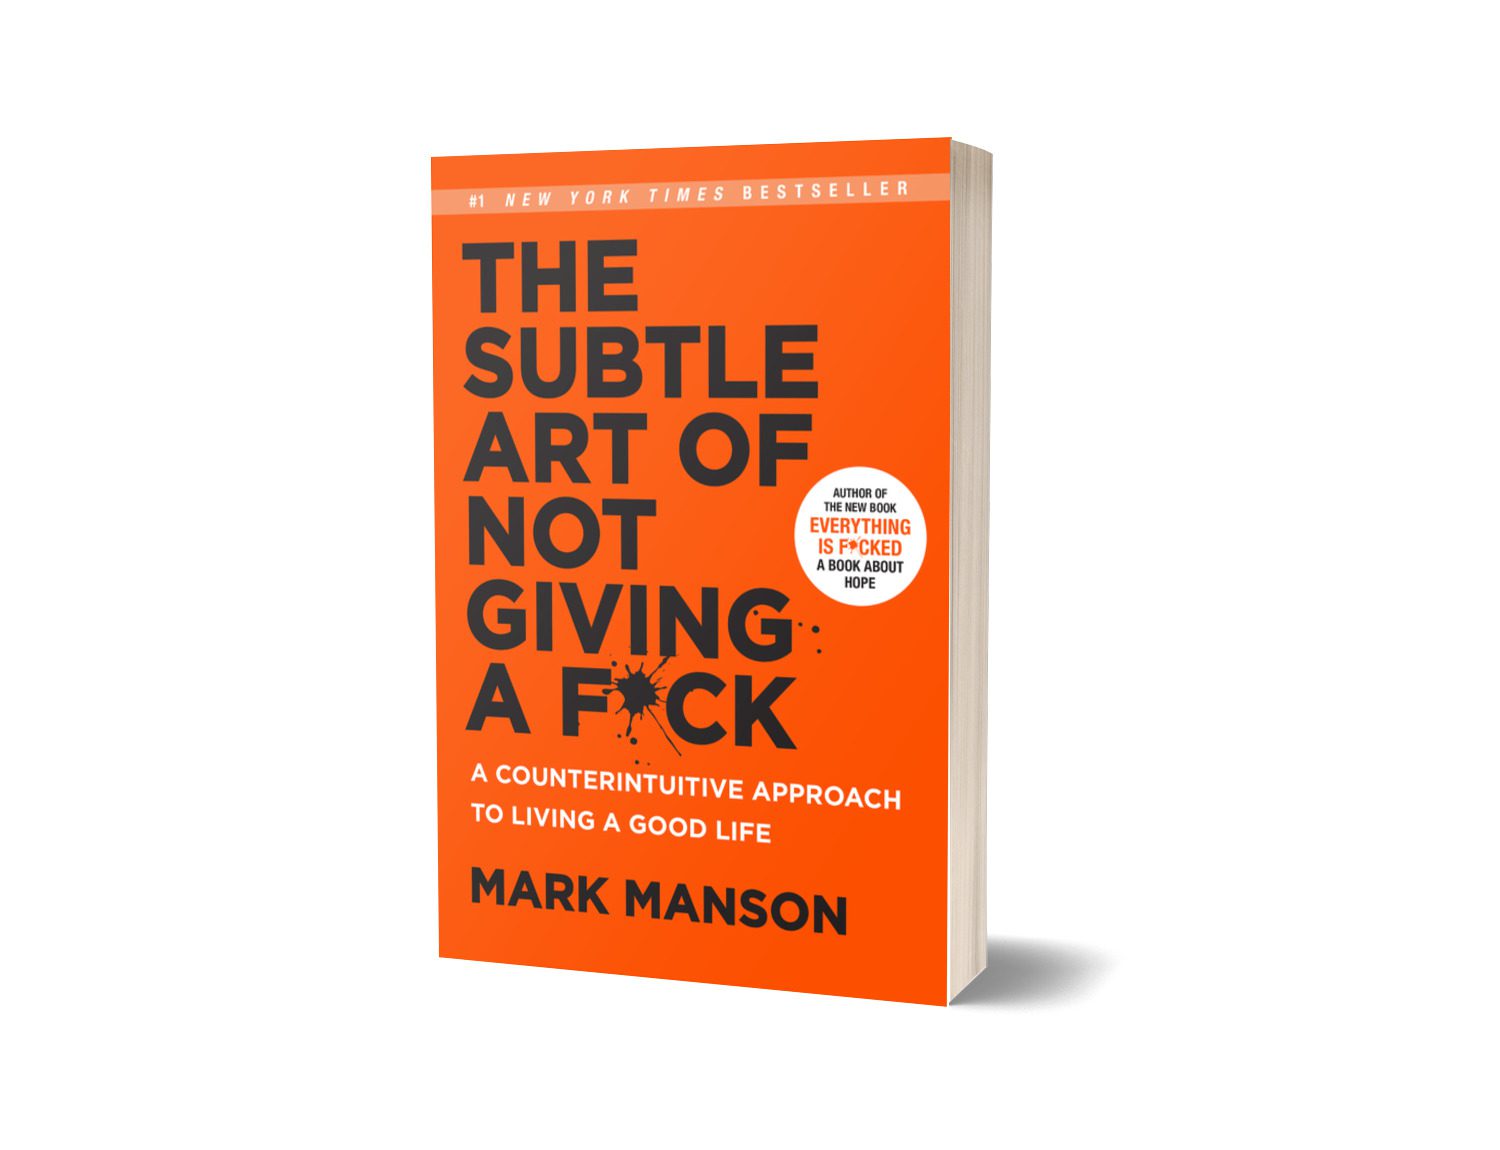 Give a new life. The subtle Art of not giving. Mark Manson. CK the Art of not.